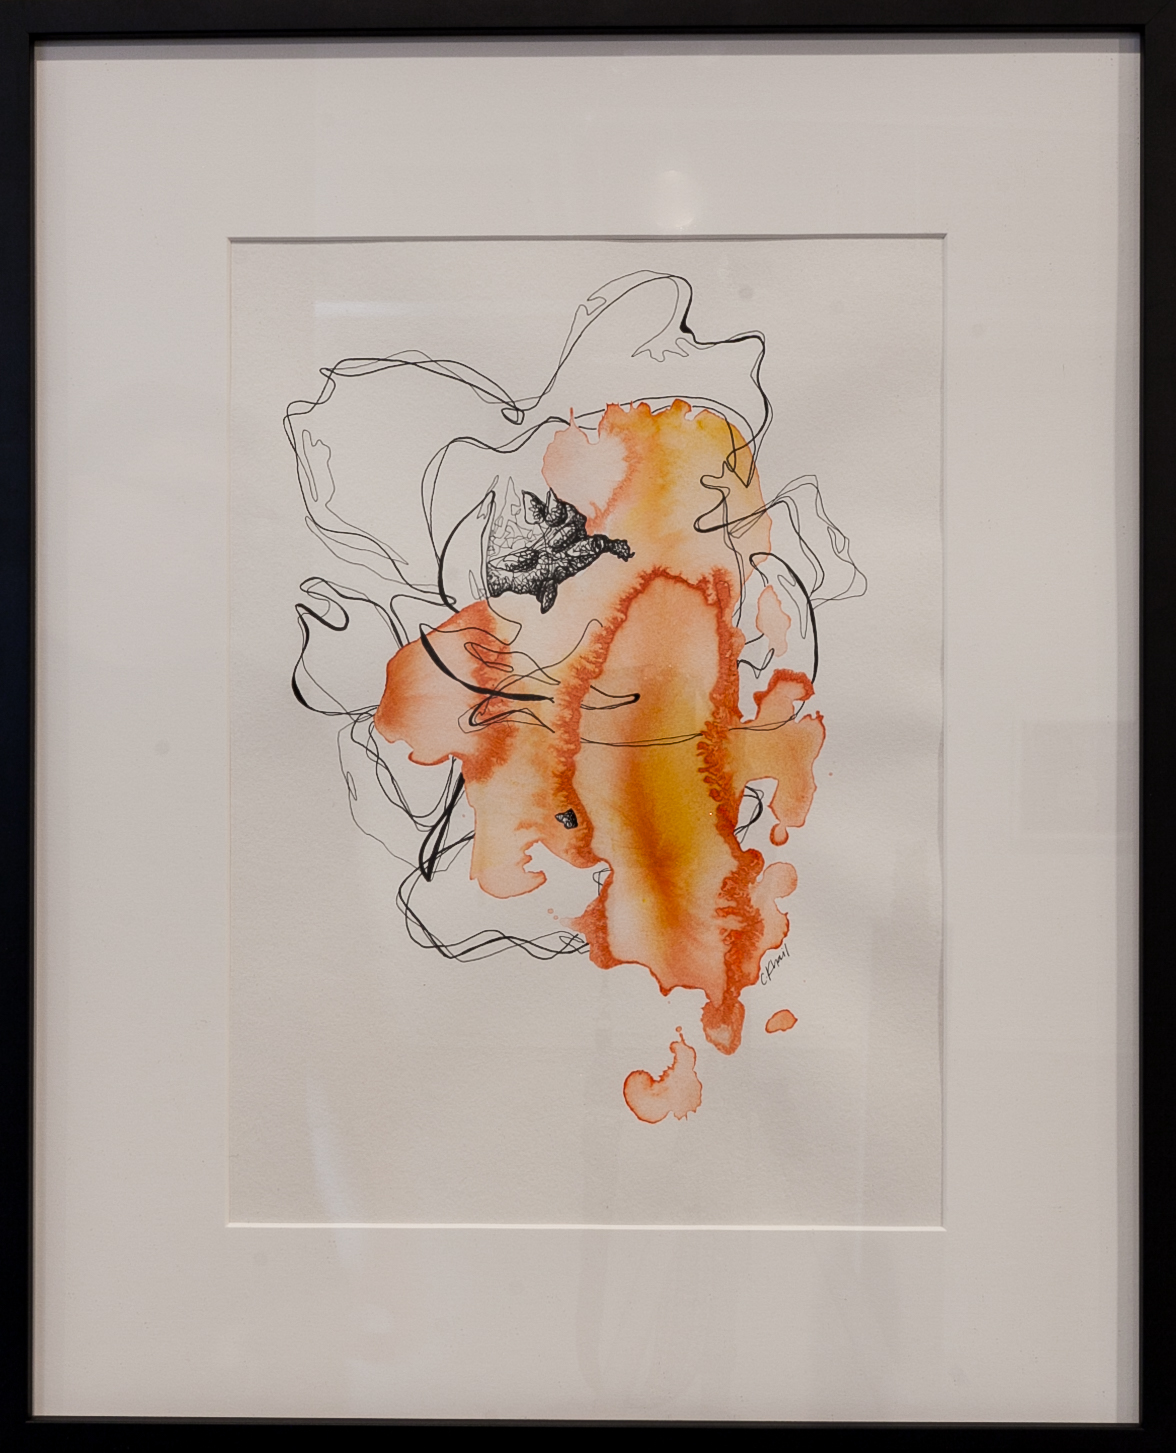  Courtney Khail (Atlanta, GA)   Dreams In Color: Orange , 2018  Medium: Watercolor and ink on paper  Dimensions: 14x11 inches  “Specifically with  Dreams in Color , I wanted to explore the idea of finding and becoming your true self. The person you h